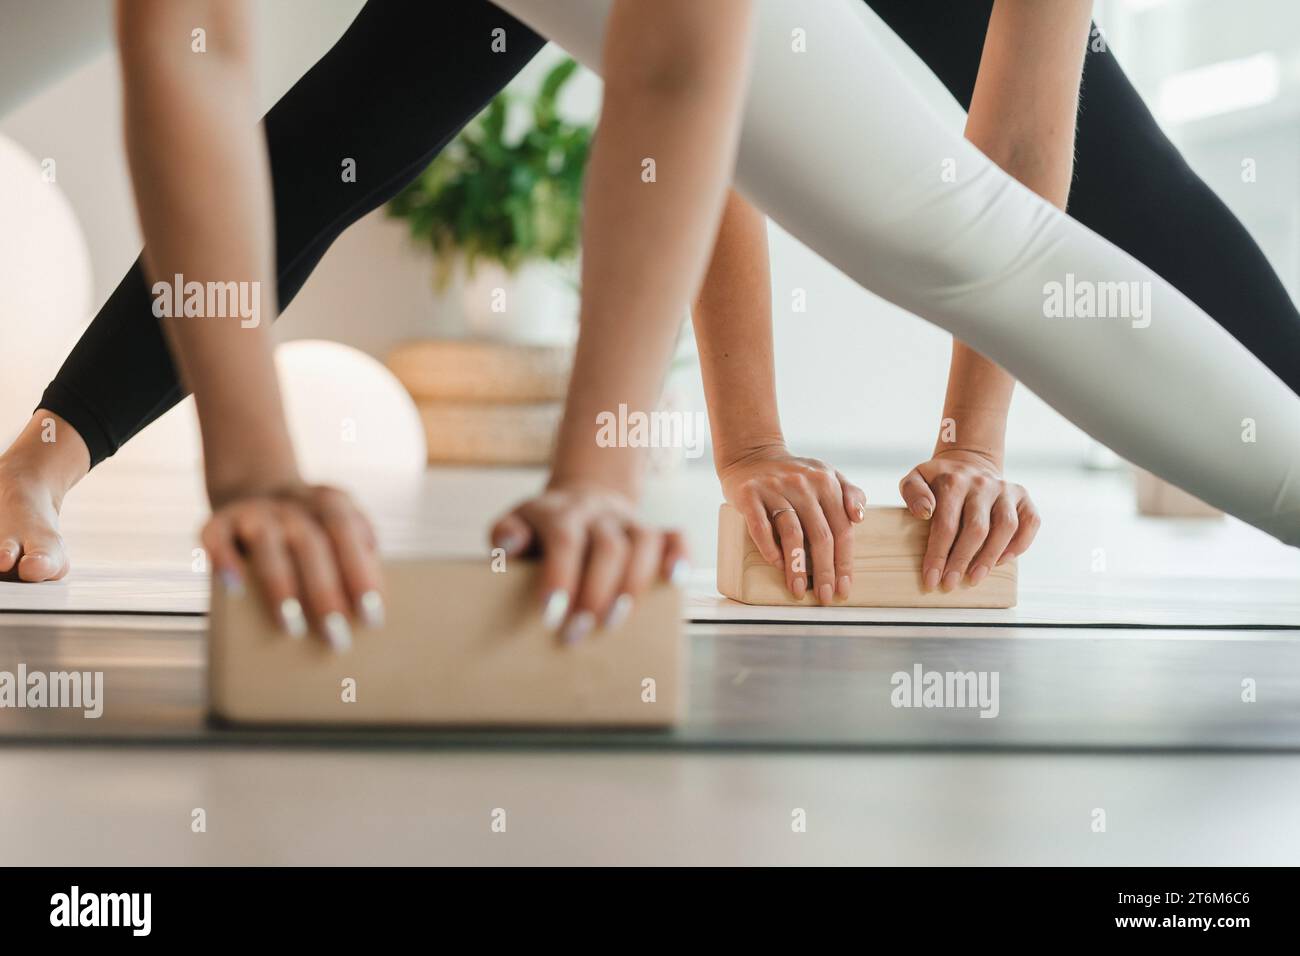 Close-up of female hands and feet practicing yoga using yoga blocks to support their body. Women's Health Stock Photo